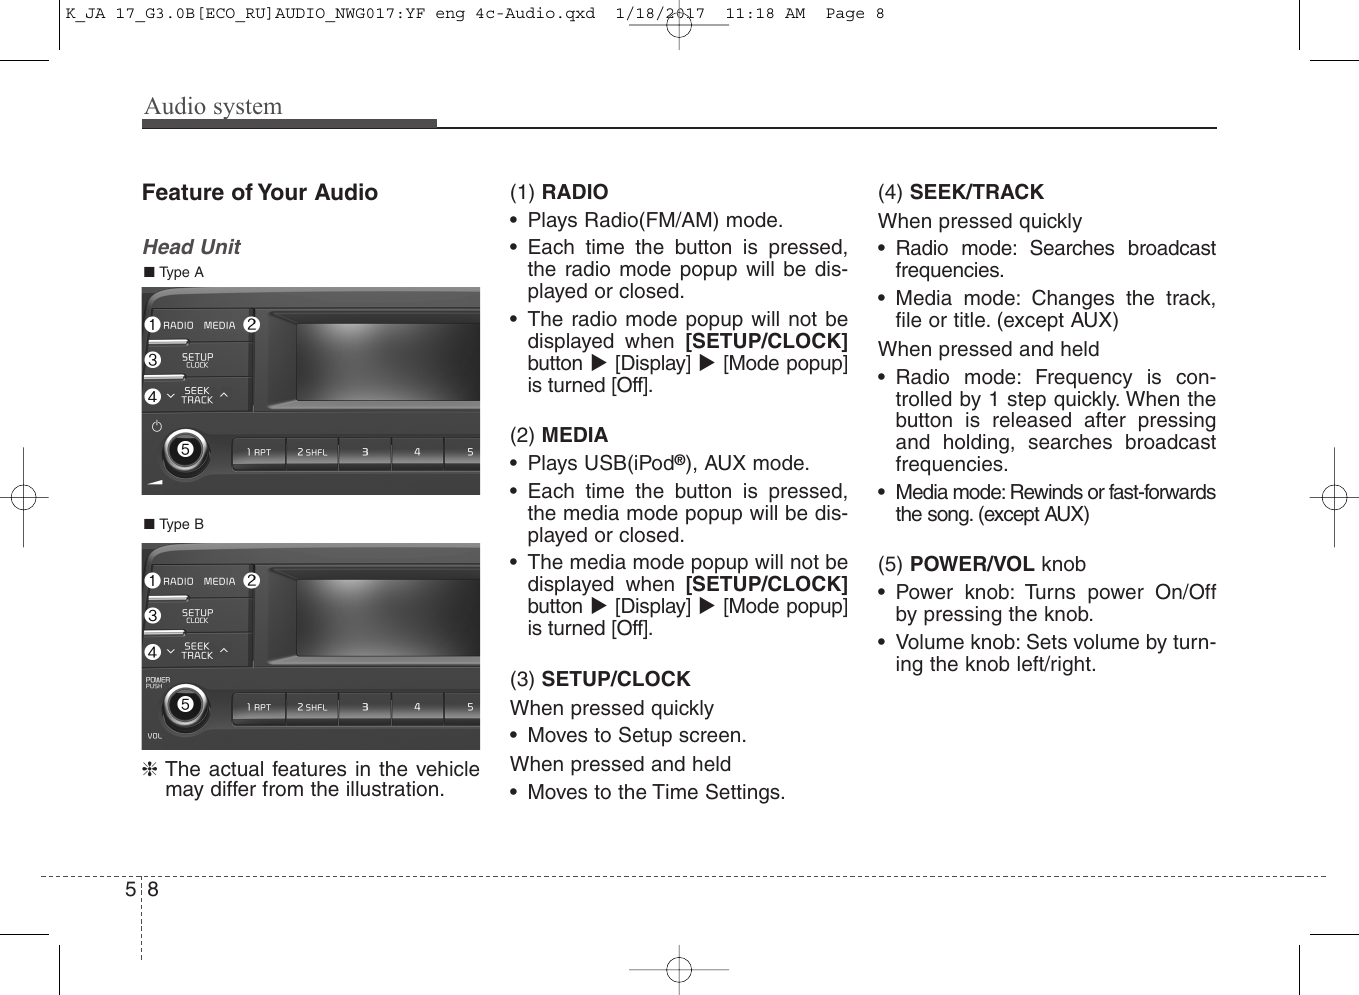 Audio system58Feature of Your AudioHead Unit❈The actual features in the vehiclemay differ from the illustration.(1) RADIO• Plays Radio(FM/AM) mode.• Each time the button is pressed,the radio mode popup will be dis-played or closed.• The radio mode popup will not bedisplayed when [SETUP/CLOCK]button [Display] [Mode popup]is turned [Off].(2) MEDIA• Plays USB(iPod®), AUX mode.• Each time the button is pressed,the media mode popup will be dis-played or closed. • The media mode popup will not bedisplayed when [SETUP/CLOCK]button [Display] [Mode popup]is turned [Off].(3) SETUP/CLOCKWhen pressed quickly• Moves to Setup screen.When pressed and held• Moves to the Time Settings.(4) SEEK/TRACKWhen pressed quickly• Radio mode: Searches broadcastfrequencies.• Media mode: Changes the track,file or title. (except AUX)When pressed and held• Radio mode: Frequency is con-trolled by 1 step quickly. When thebutton is released after pressingand holding, searches broadcastfrequencies.• Media mode: Rewinds or fast-forwardsthe song. (except AUX)(5) POWER/VOL knob• Power knob: Turns power On/Offby pressing the knob.• Volume knob: Sets volume by turn-ing the knob left/right.■ Type B■ Type AK_JA 17_G3.0B[ECO_RU]AUDIO_NWG017:YF eng 4c-Audio.qxd  1/18/2017  11:18 AM  Page 8